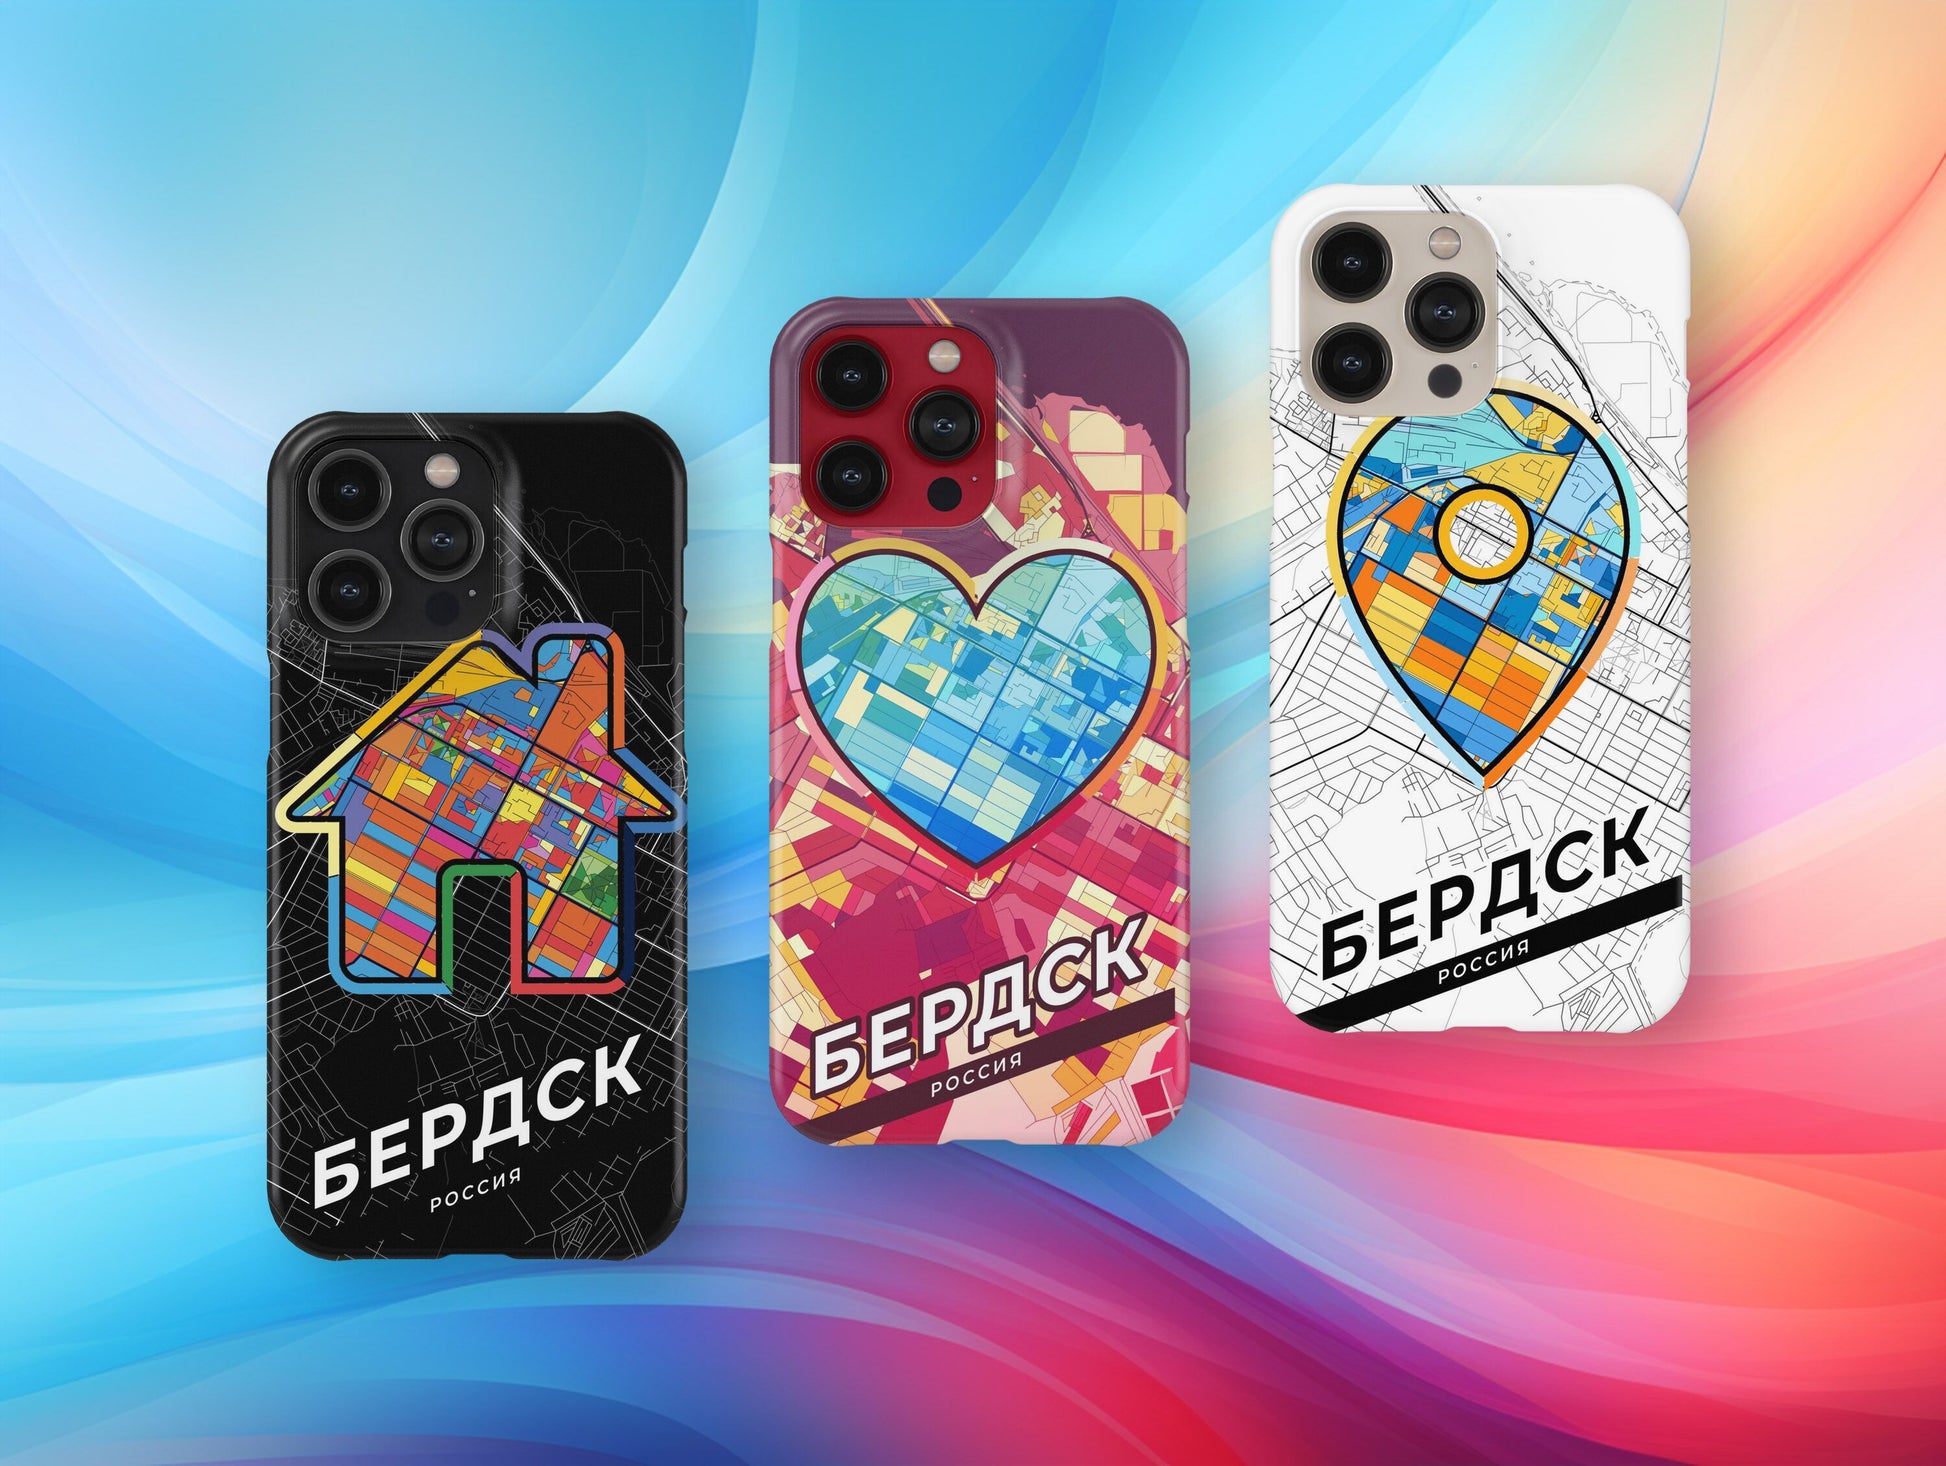 Berdsk Russia slim phone case with colorful icon. Birthday, wedding or housewarming gift. Couple match cases.